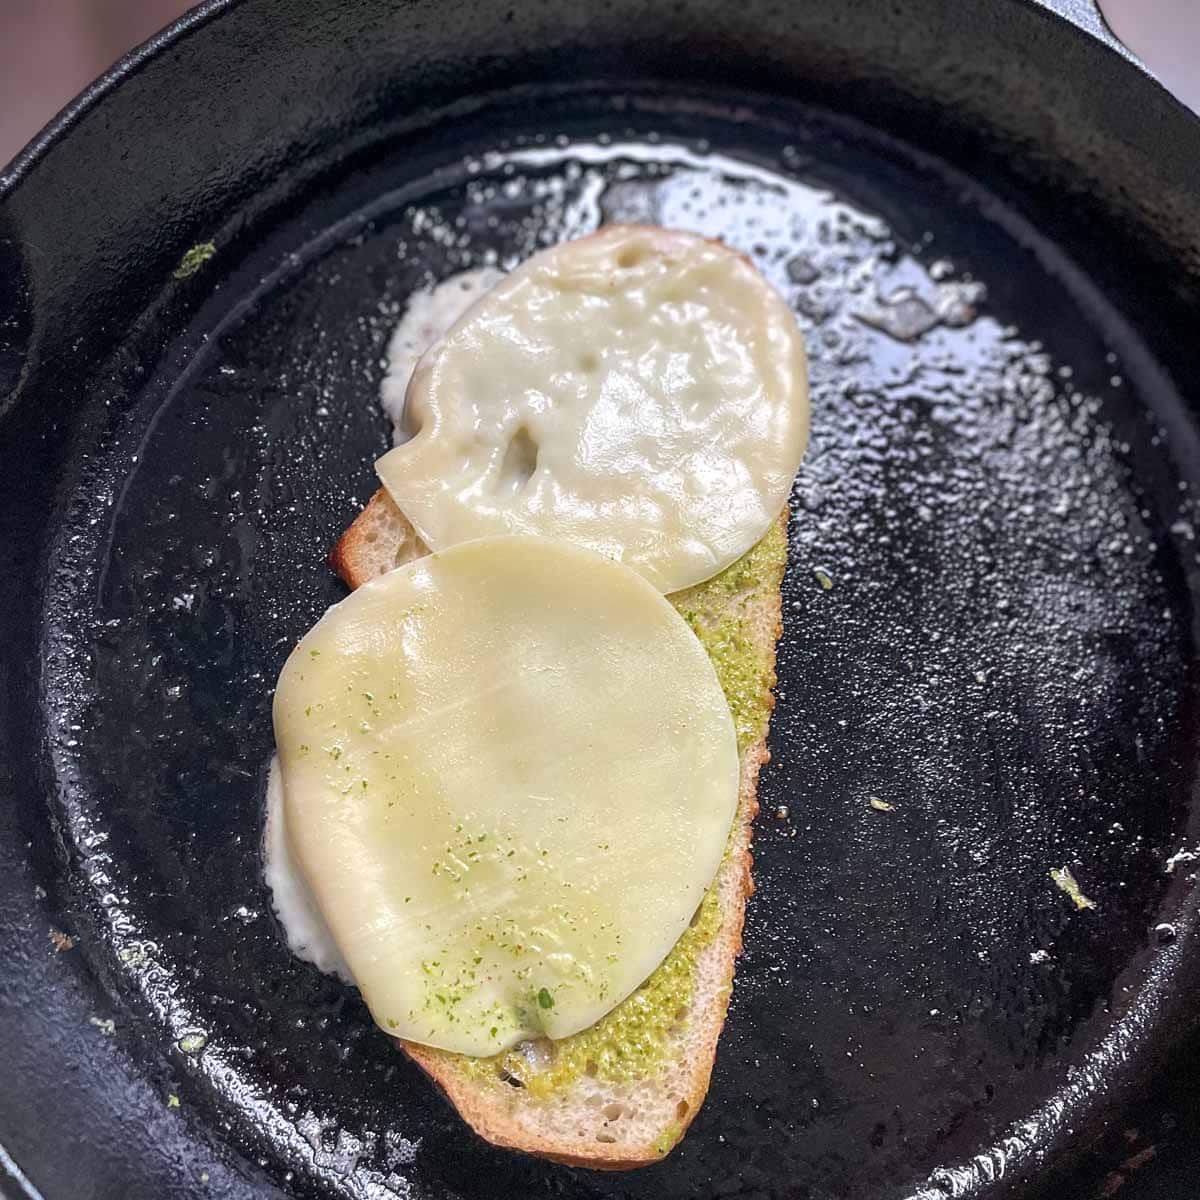 A slice of bread with cheese on top is shown toasting in a cast iron skillet.